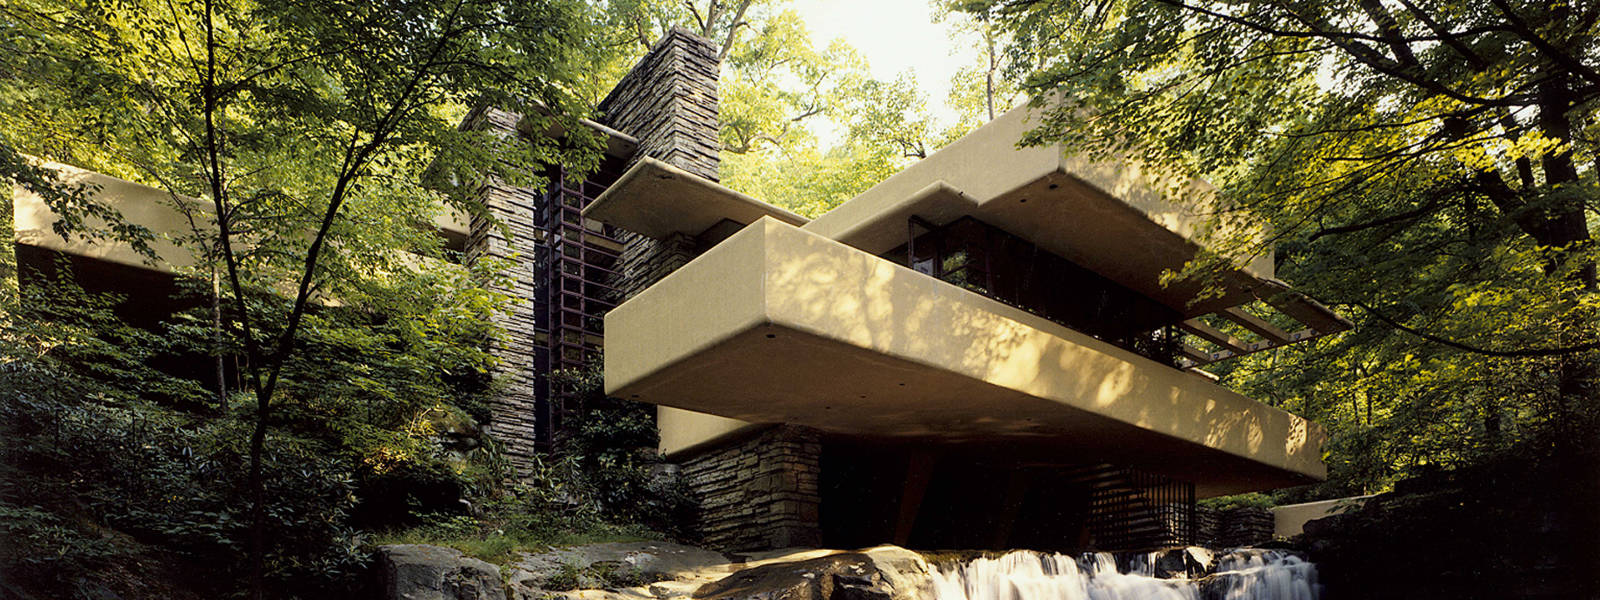 Press Release: Fallingwater Reopens for 59th Tour Season March 5